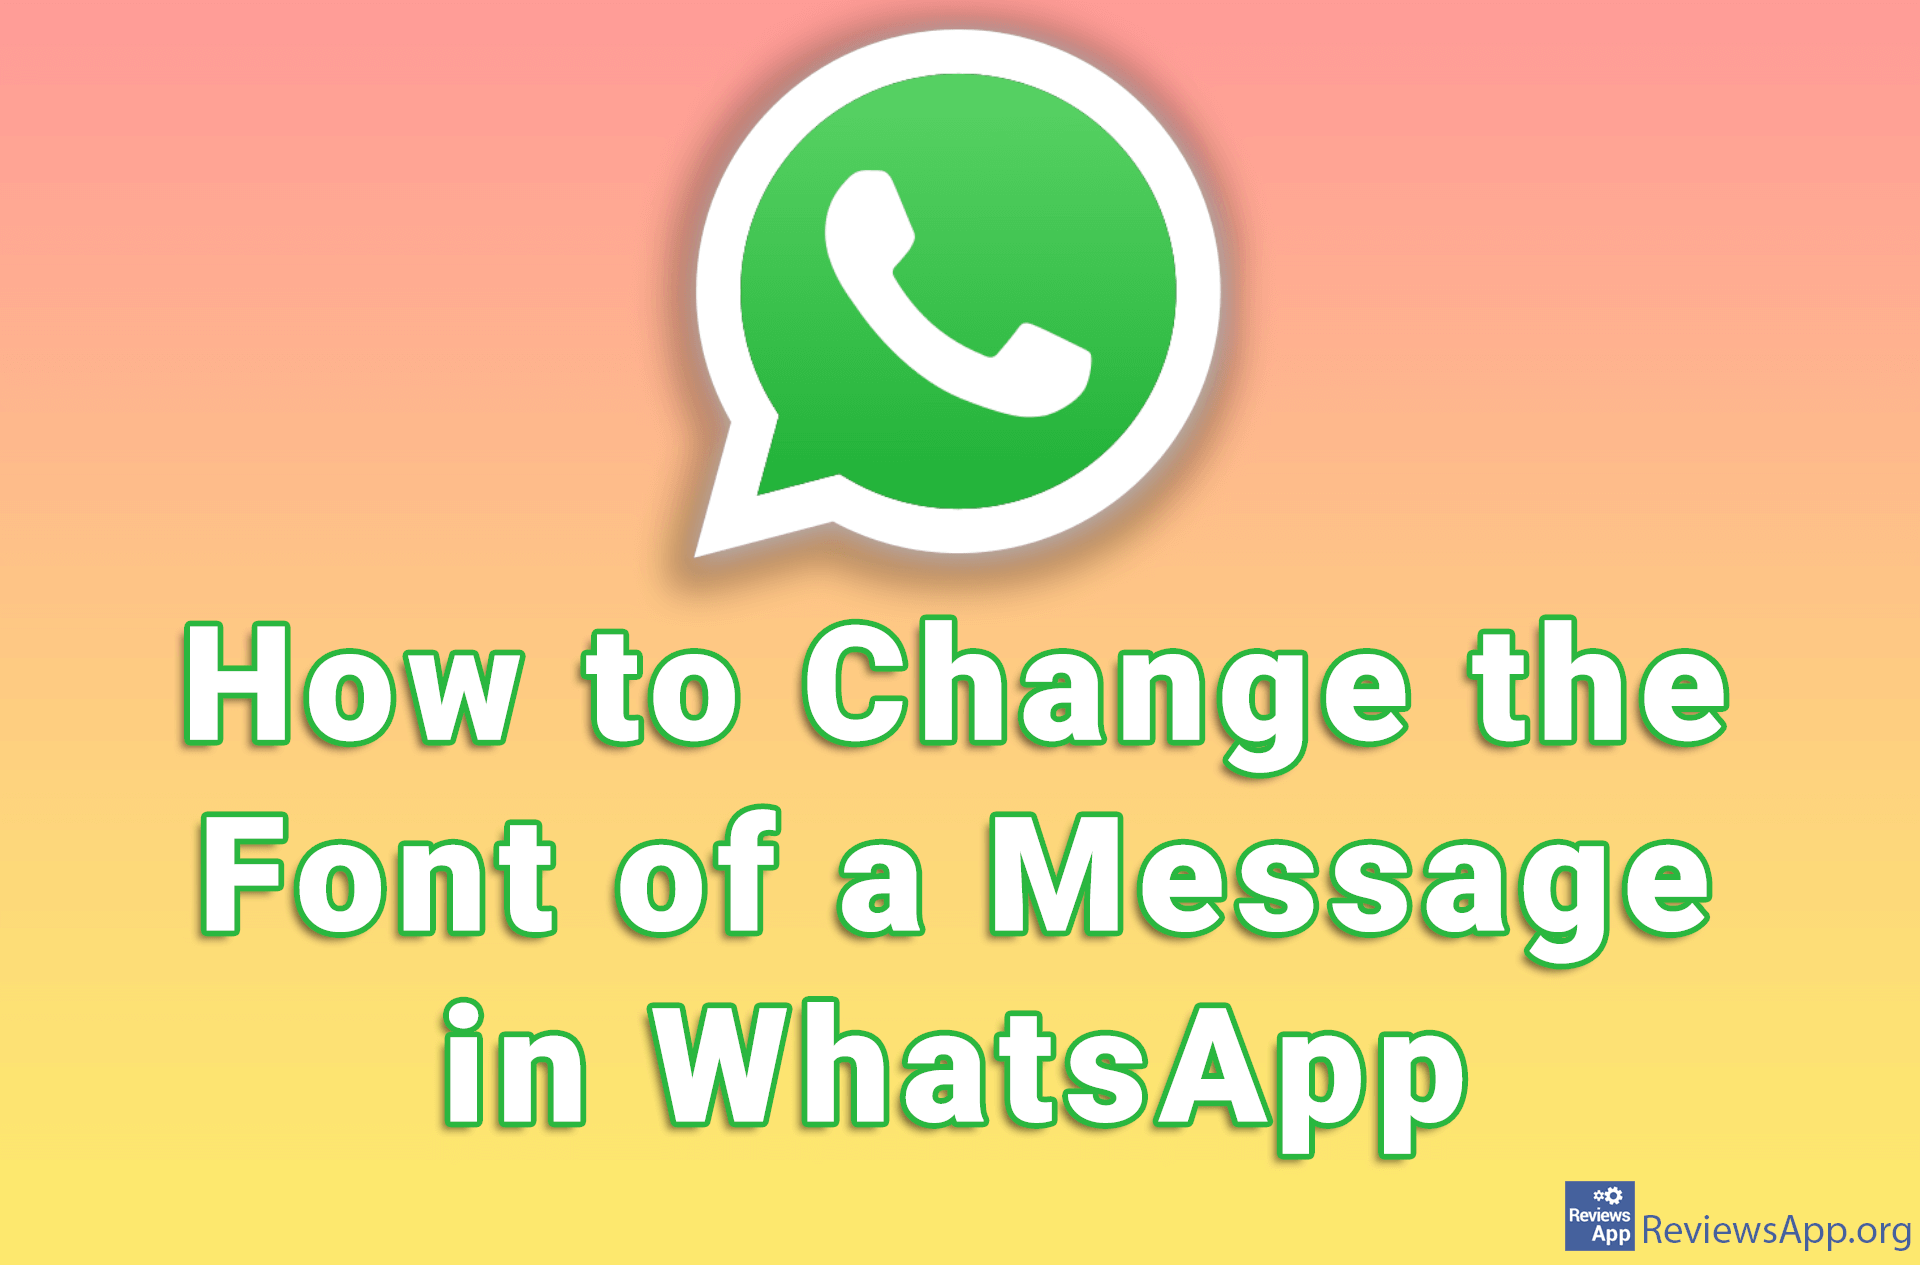 How to Change the Font of a Message in WhatsApp